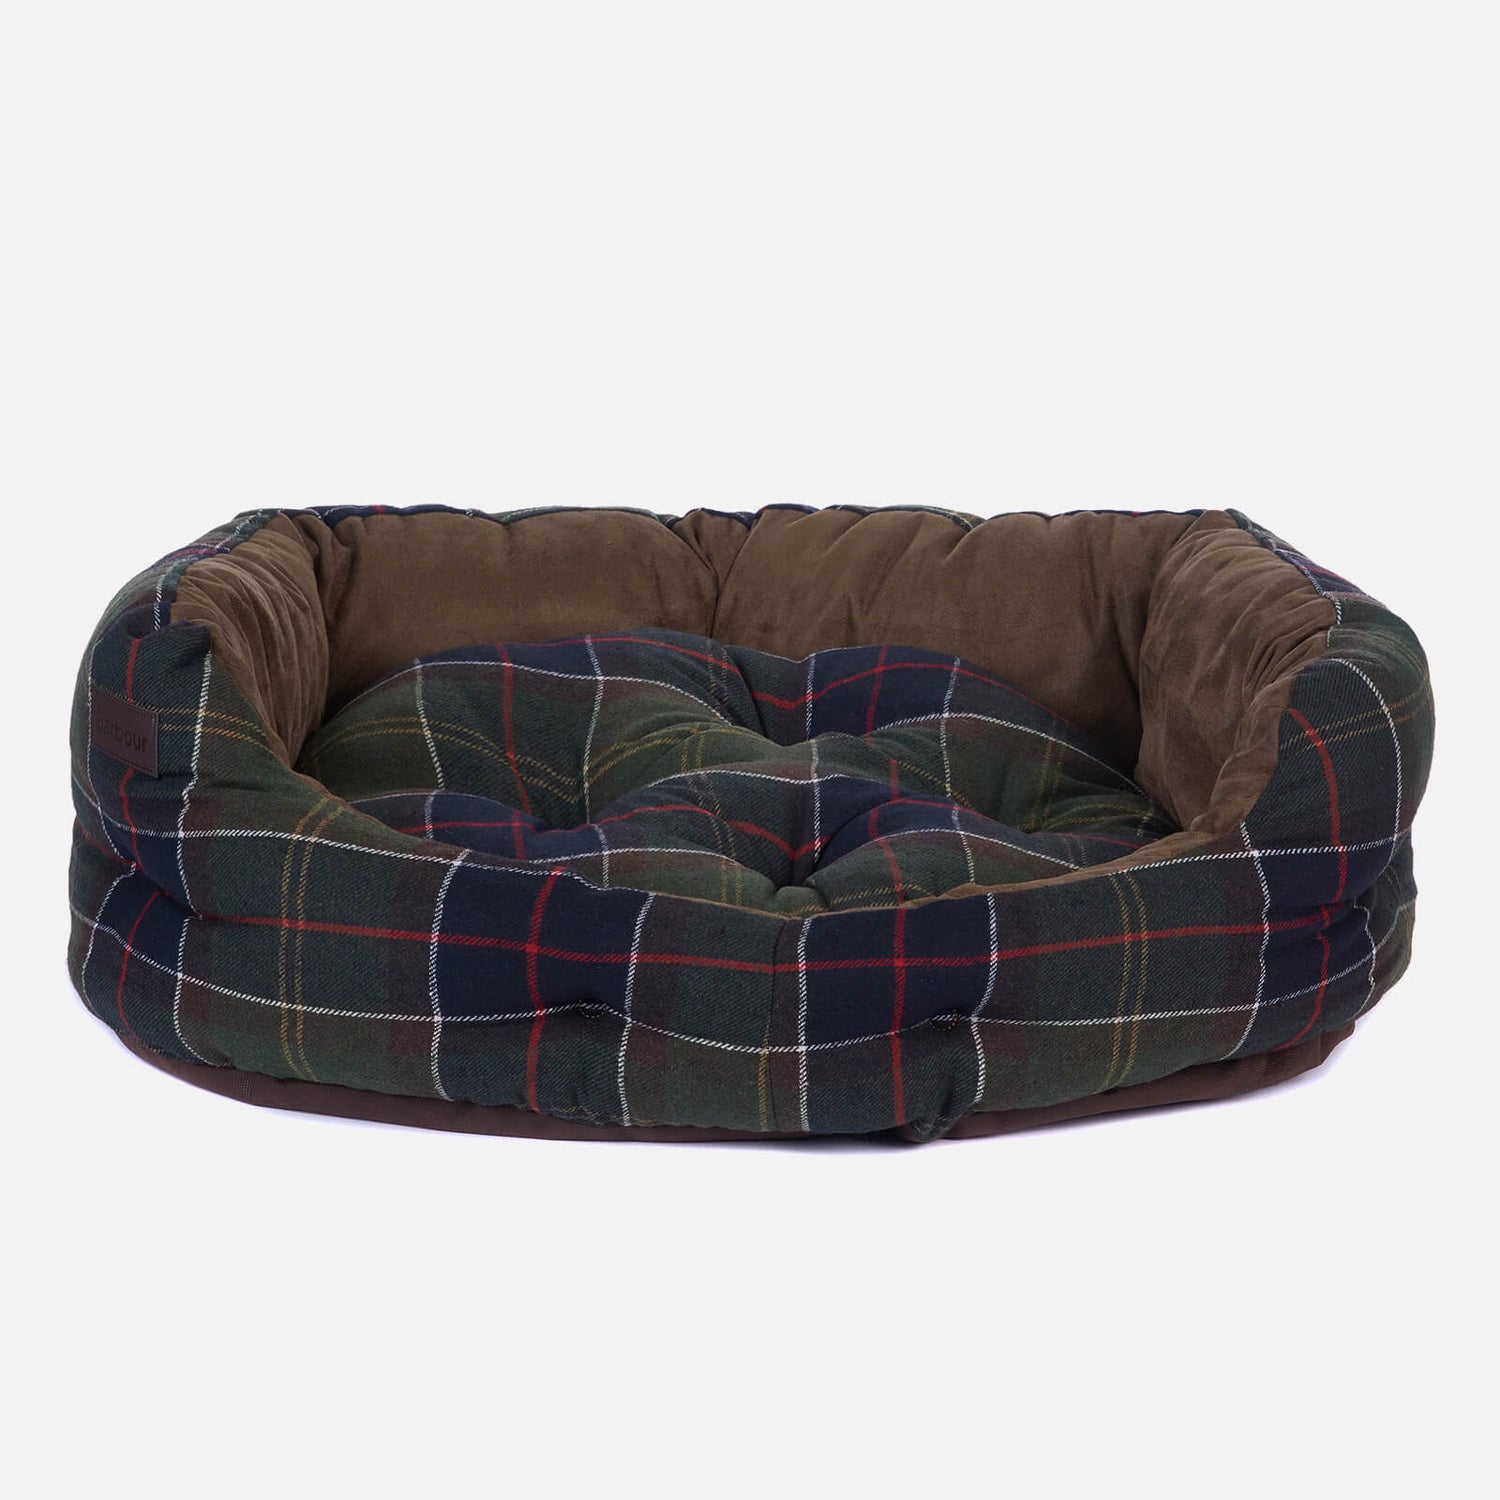 Barbour Dogs Luxury Bed - Classic Tartan - 30 Inches